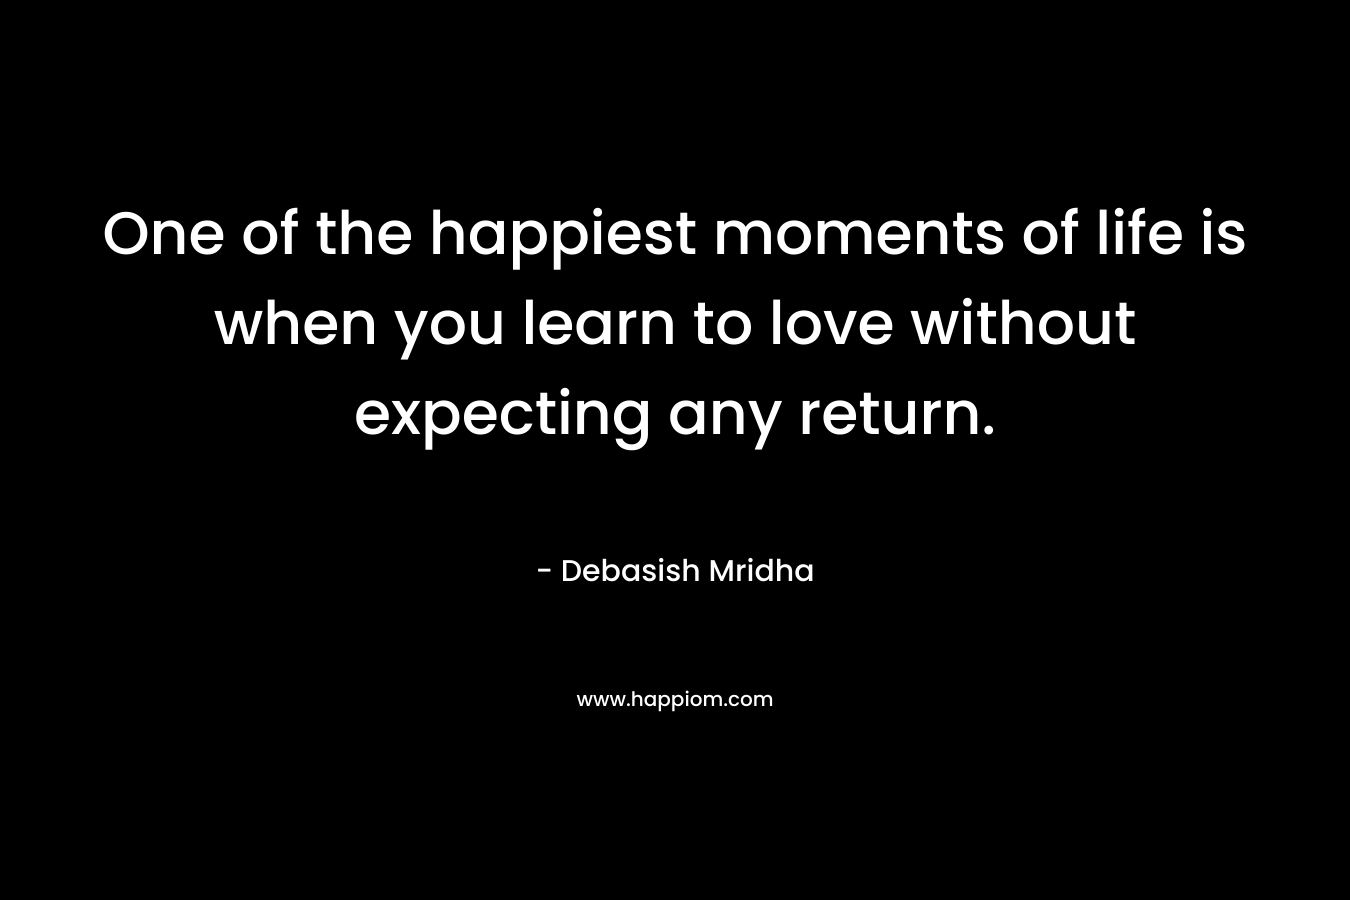 One of the happiest moments of life is when you learn to love without expecting any return.